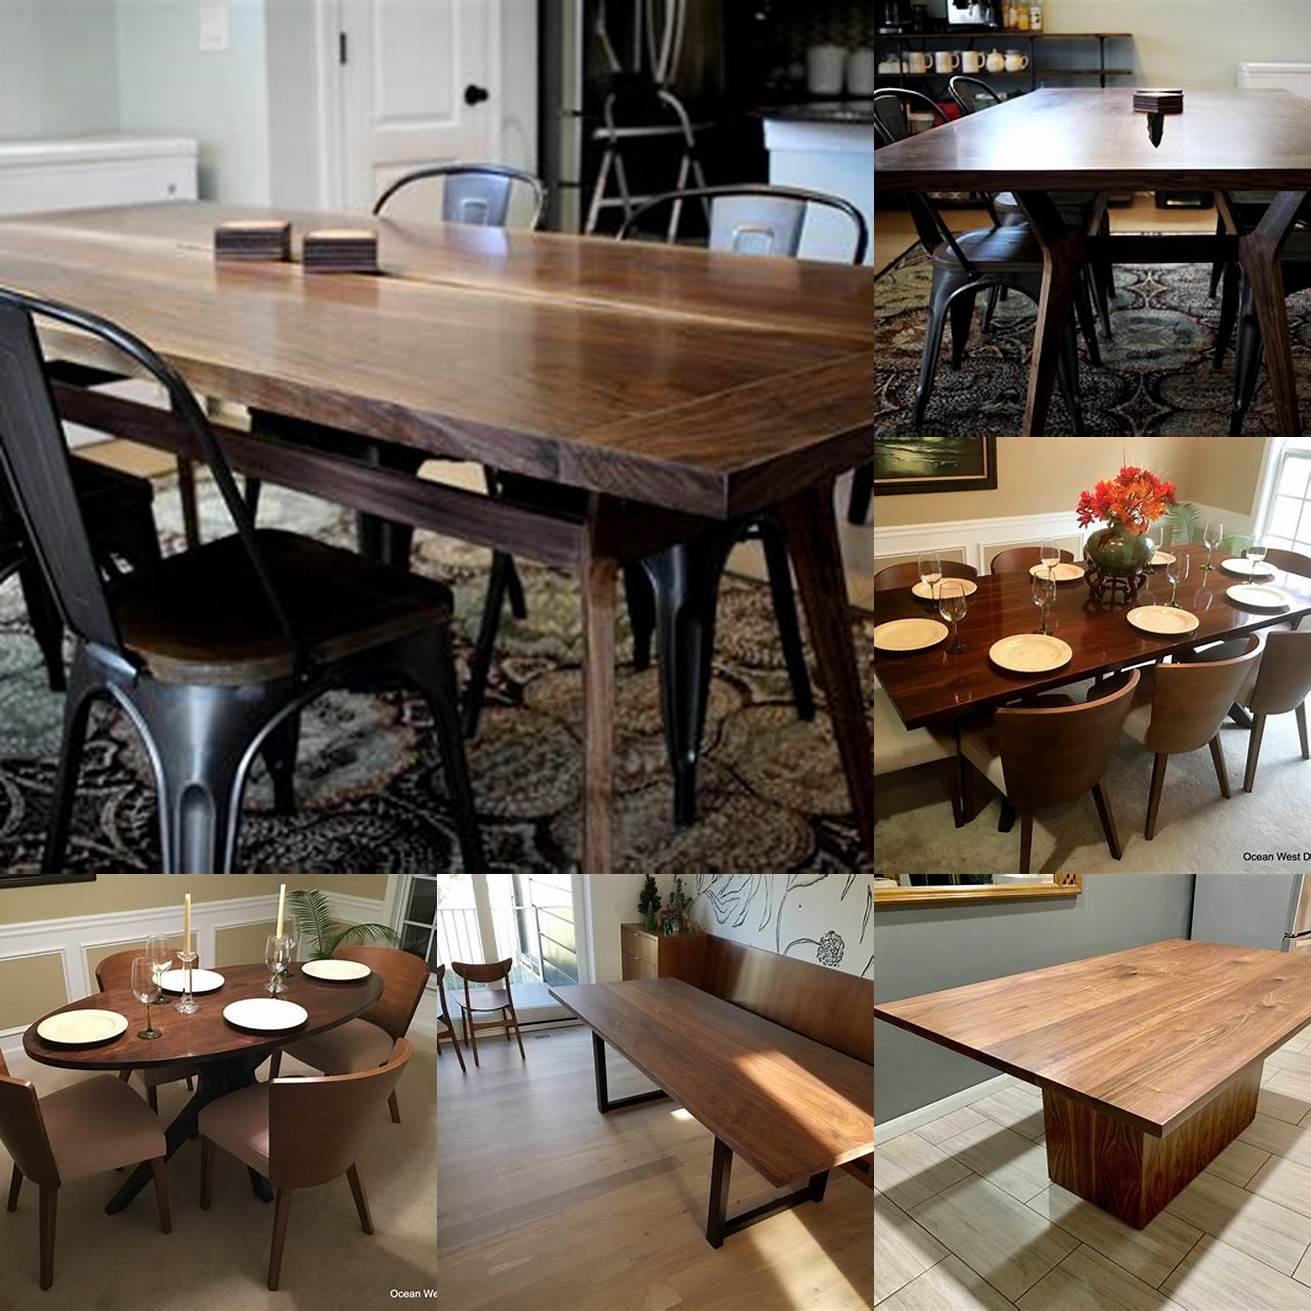 A modern walnut dining table can serve as the centerpiece of your dining room